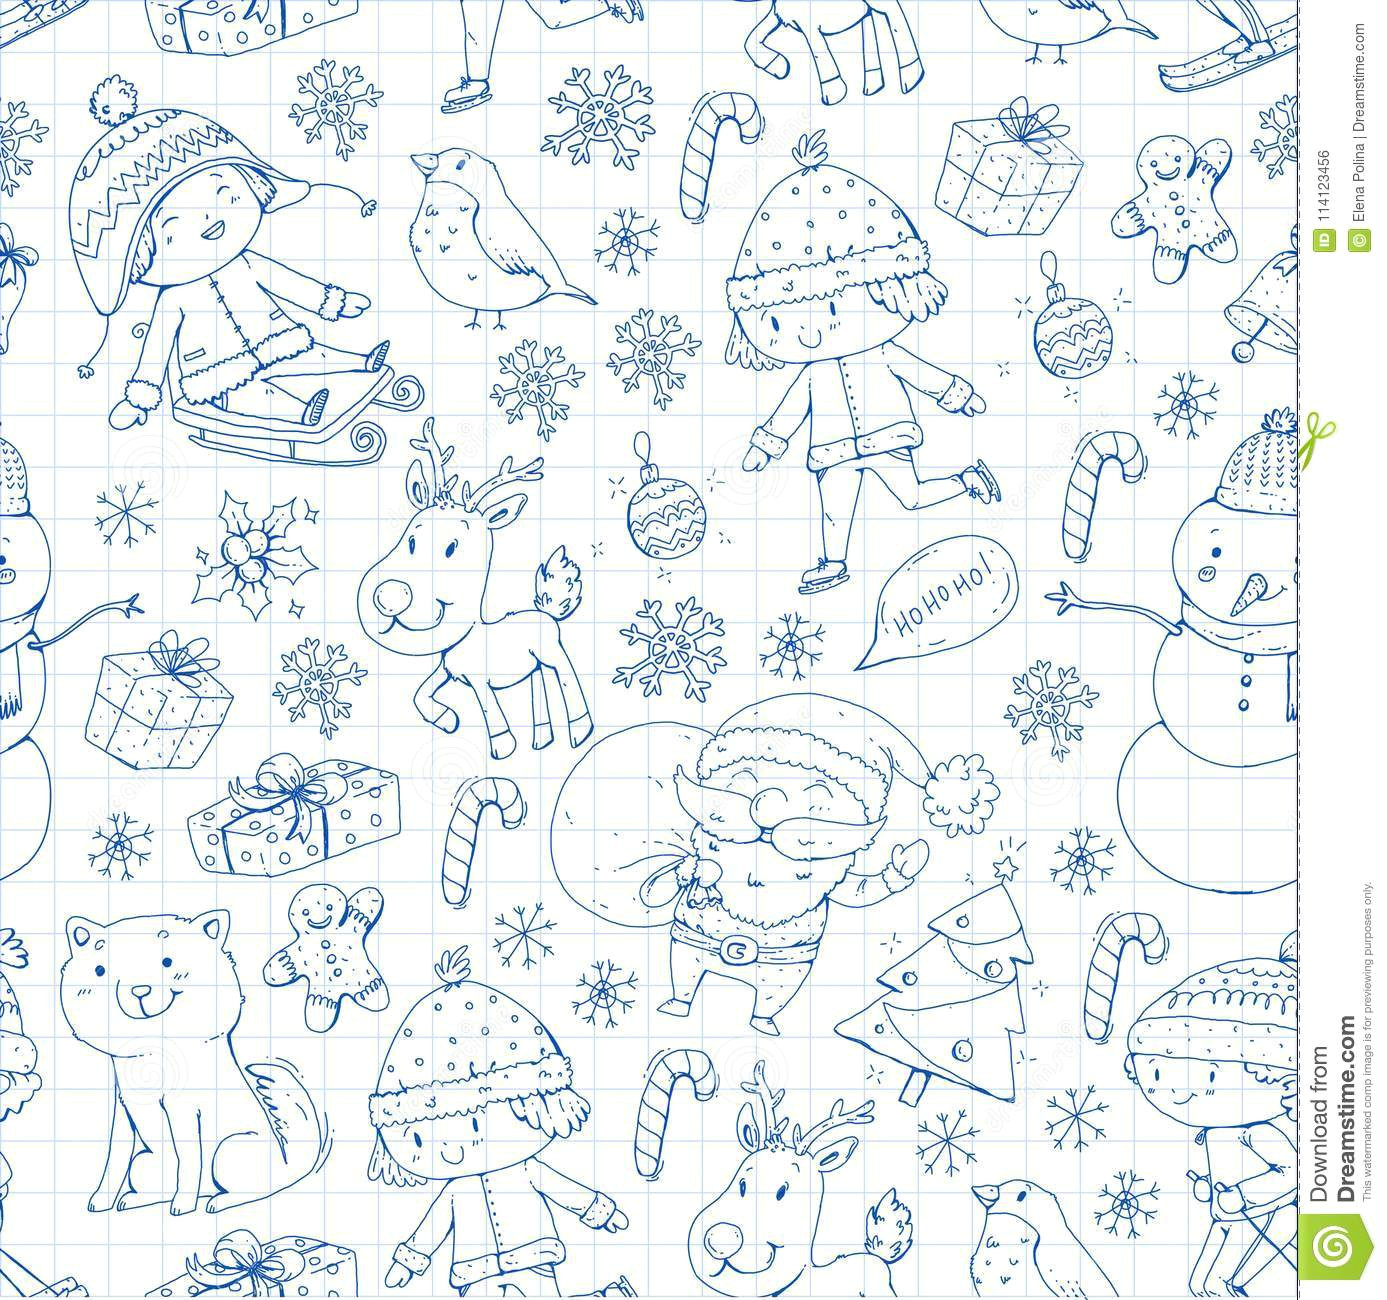 Cute Easy Christmas Drawings for Kids Merry Christmas Celebration with Children Kids Drawing